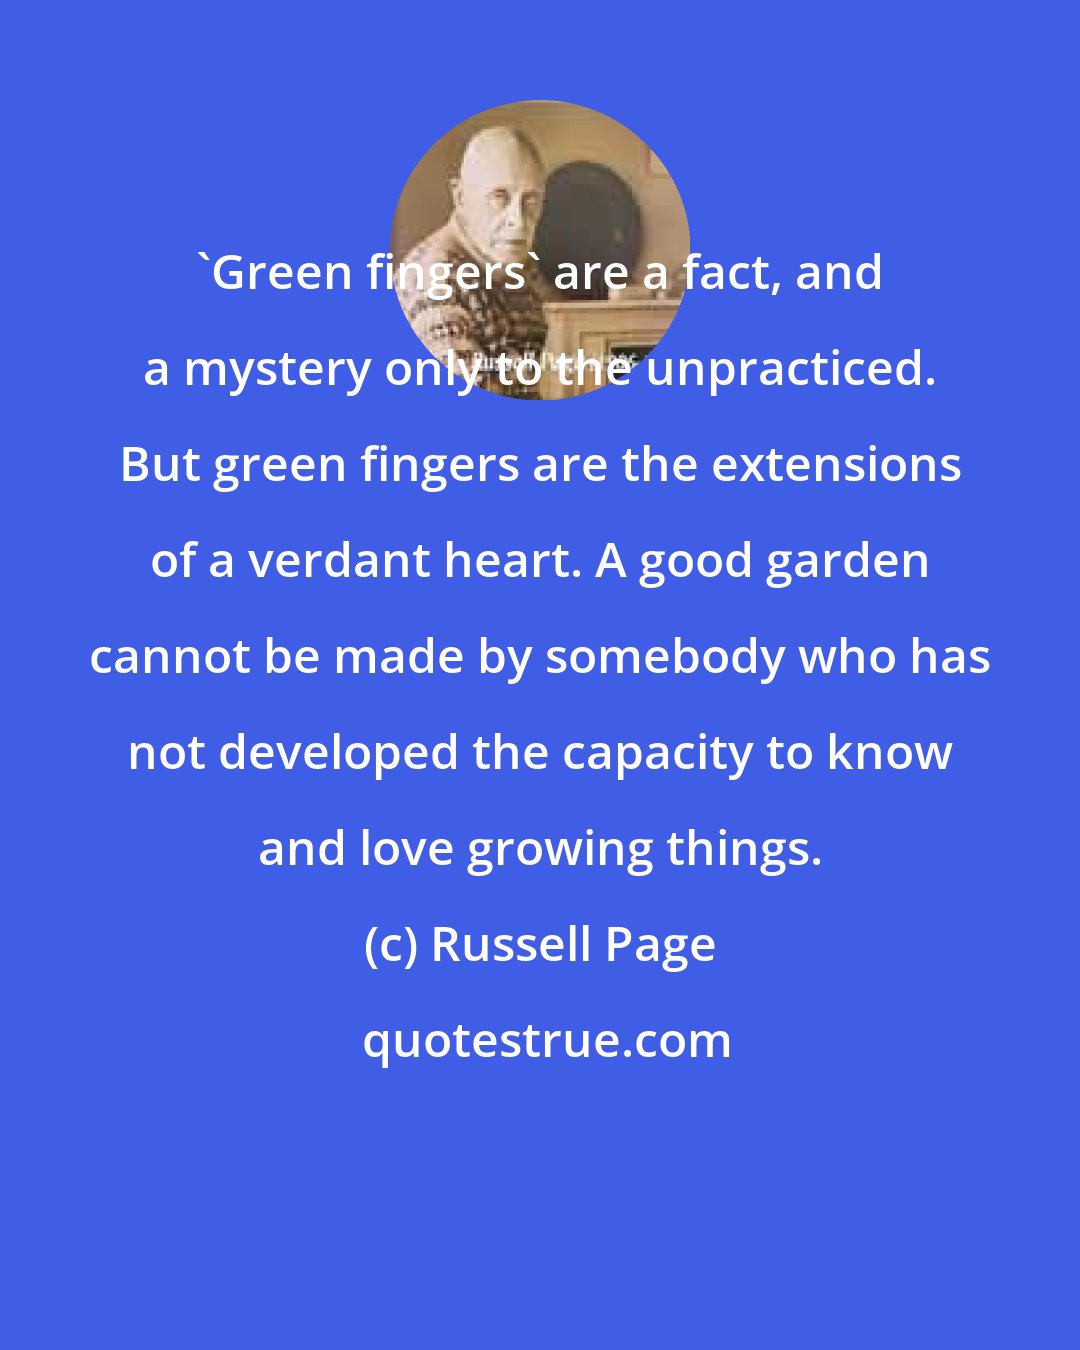 Russell Page: 'Green fingers' are a fact, and a mystery only to the unpracticed. But green fingers are the extensions of a verdant heart. A good garden cannot be made by somebody who has not developed the capacity to know and love growing things.